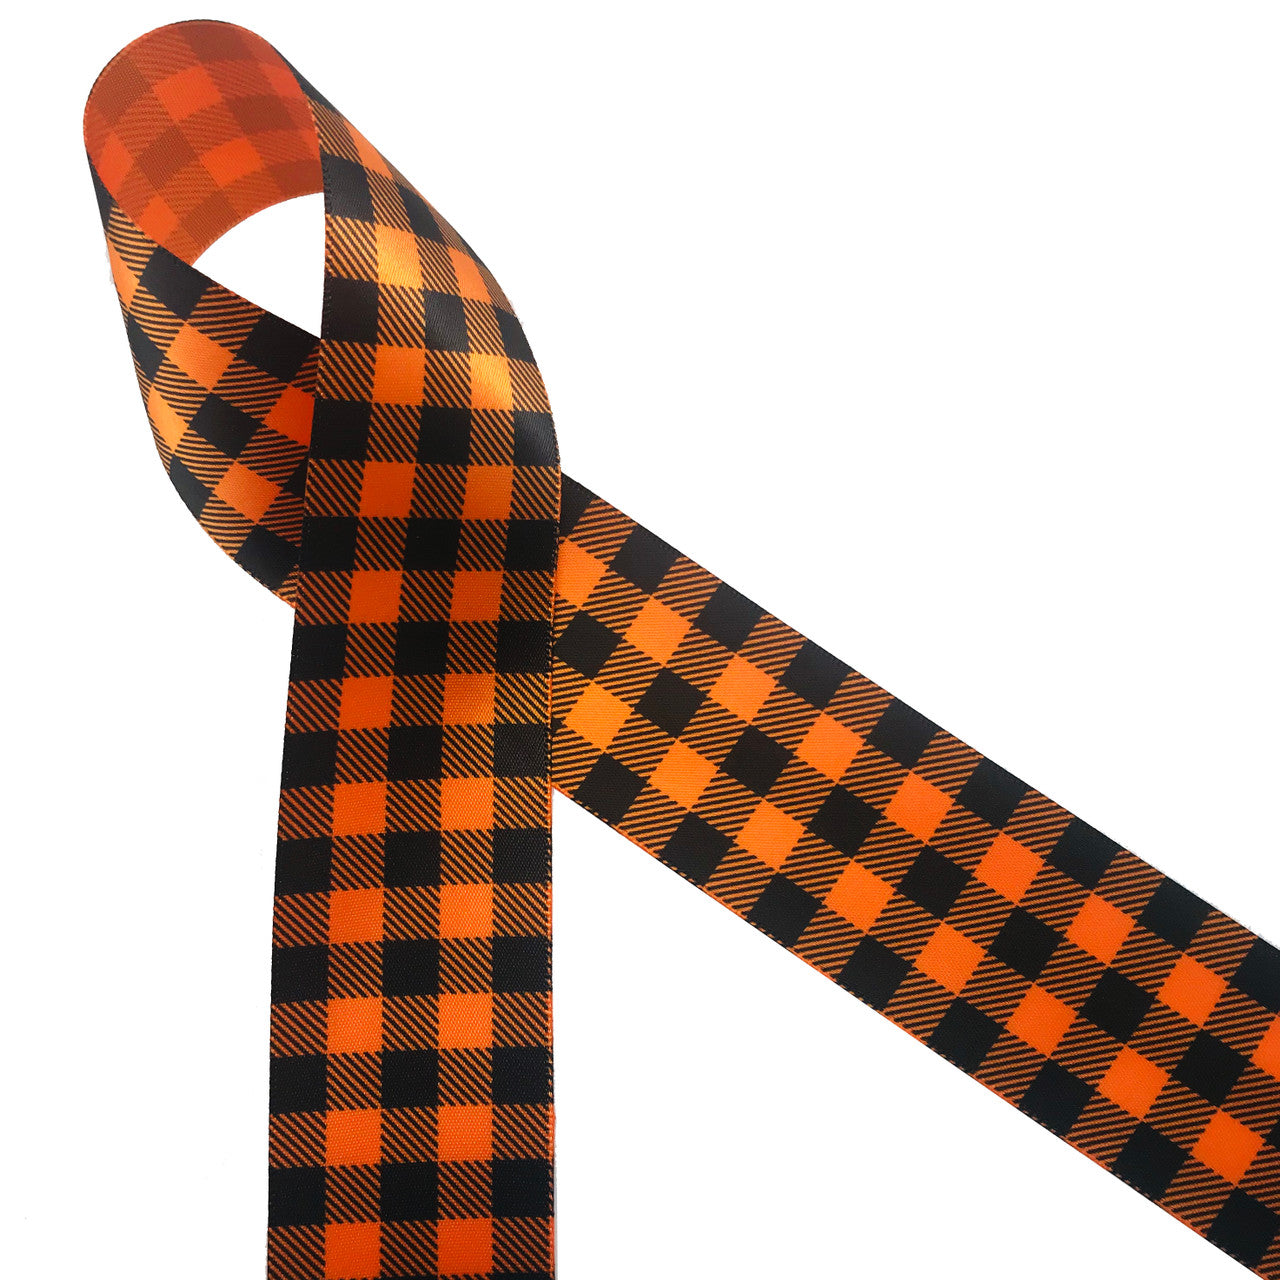 Black plaid printed on 1.5" tangerine single face satin ribbon is the ideal ribbon for all your Fall decor, crafting and gift ideas. Be sure to have this ribbon on hand for occasions from Halloween to Thanksgiving! Designed and printed in the USA